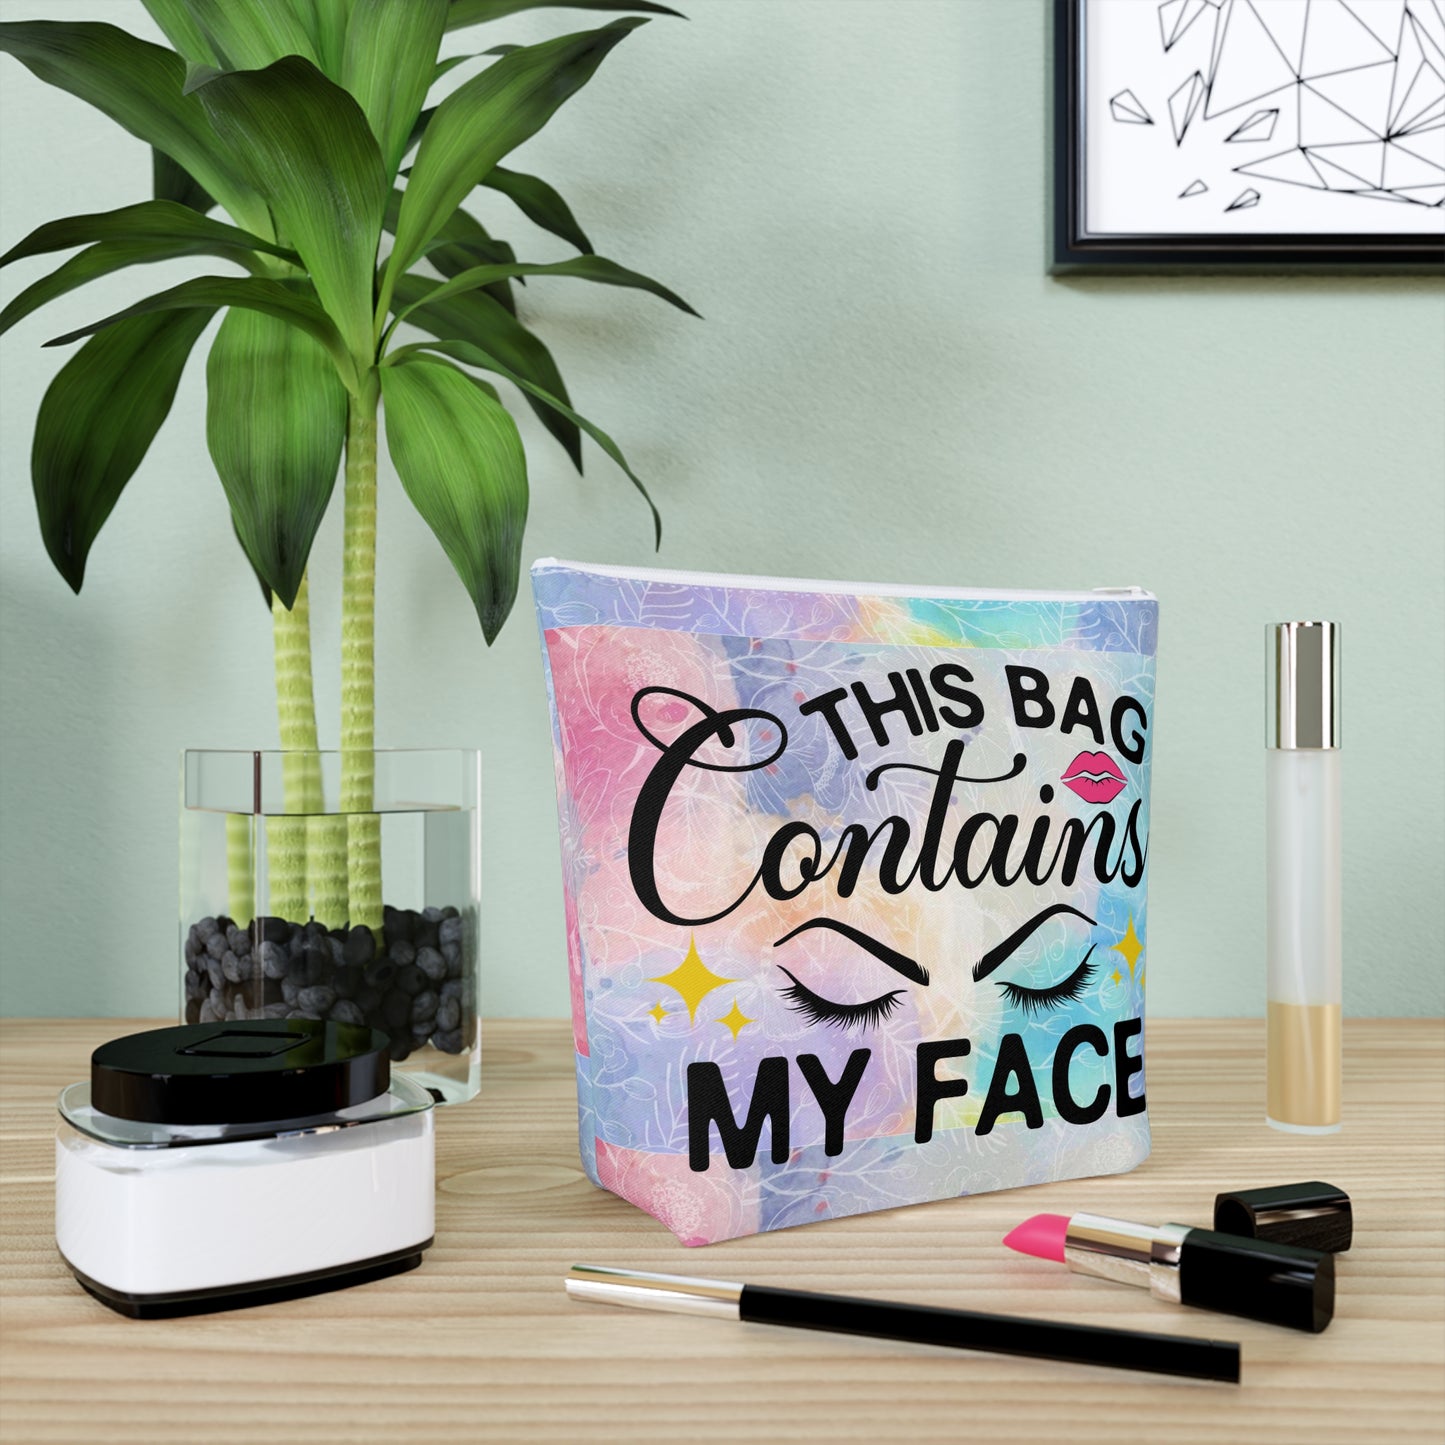 make-up funny Cotton Cosmetic Bag